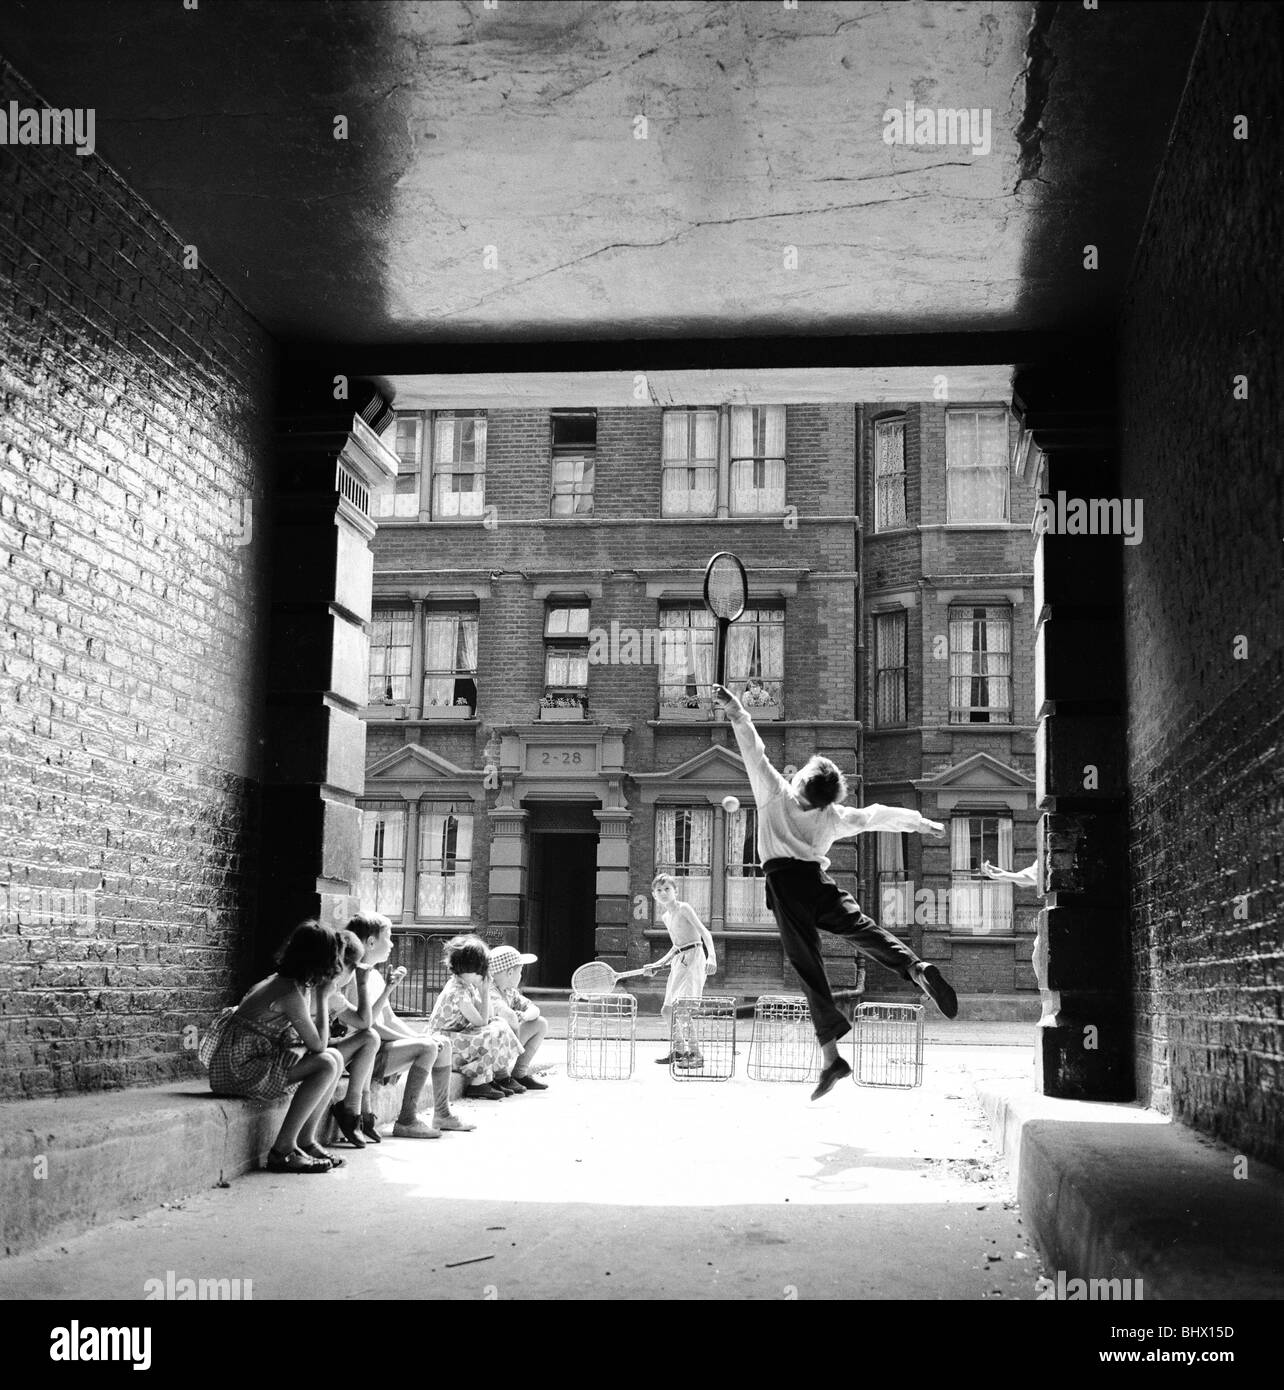 Inspired by the Wimbledon tennis championships taking place, these children enjoy a game of tennis in the back streets around their home in South East London. 9th July 1961. Stock Photo